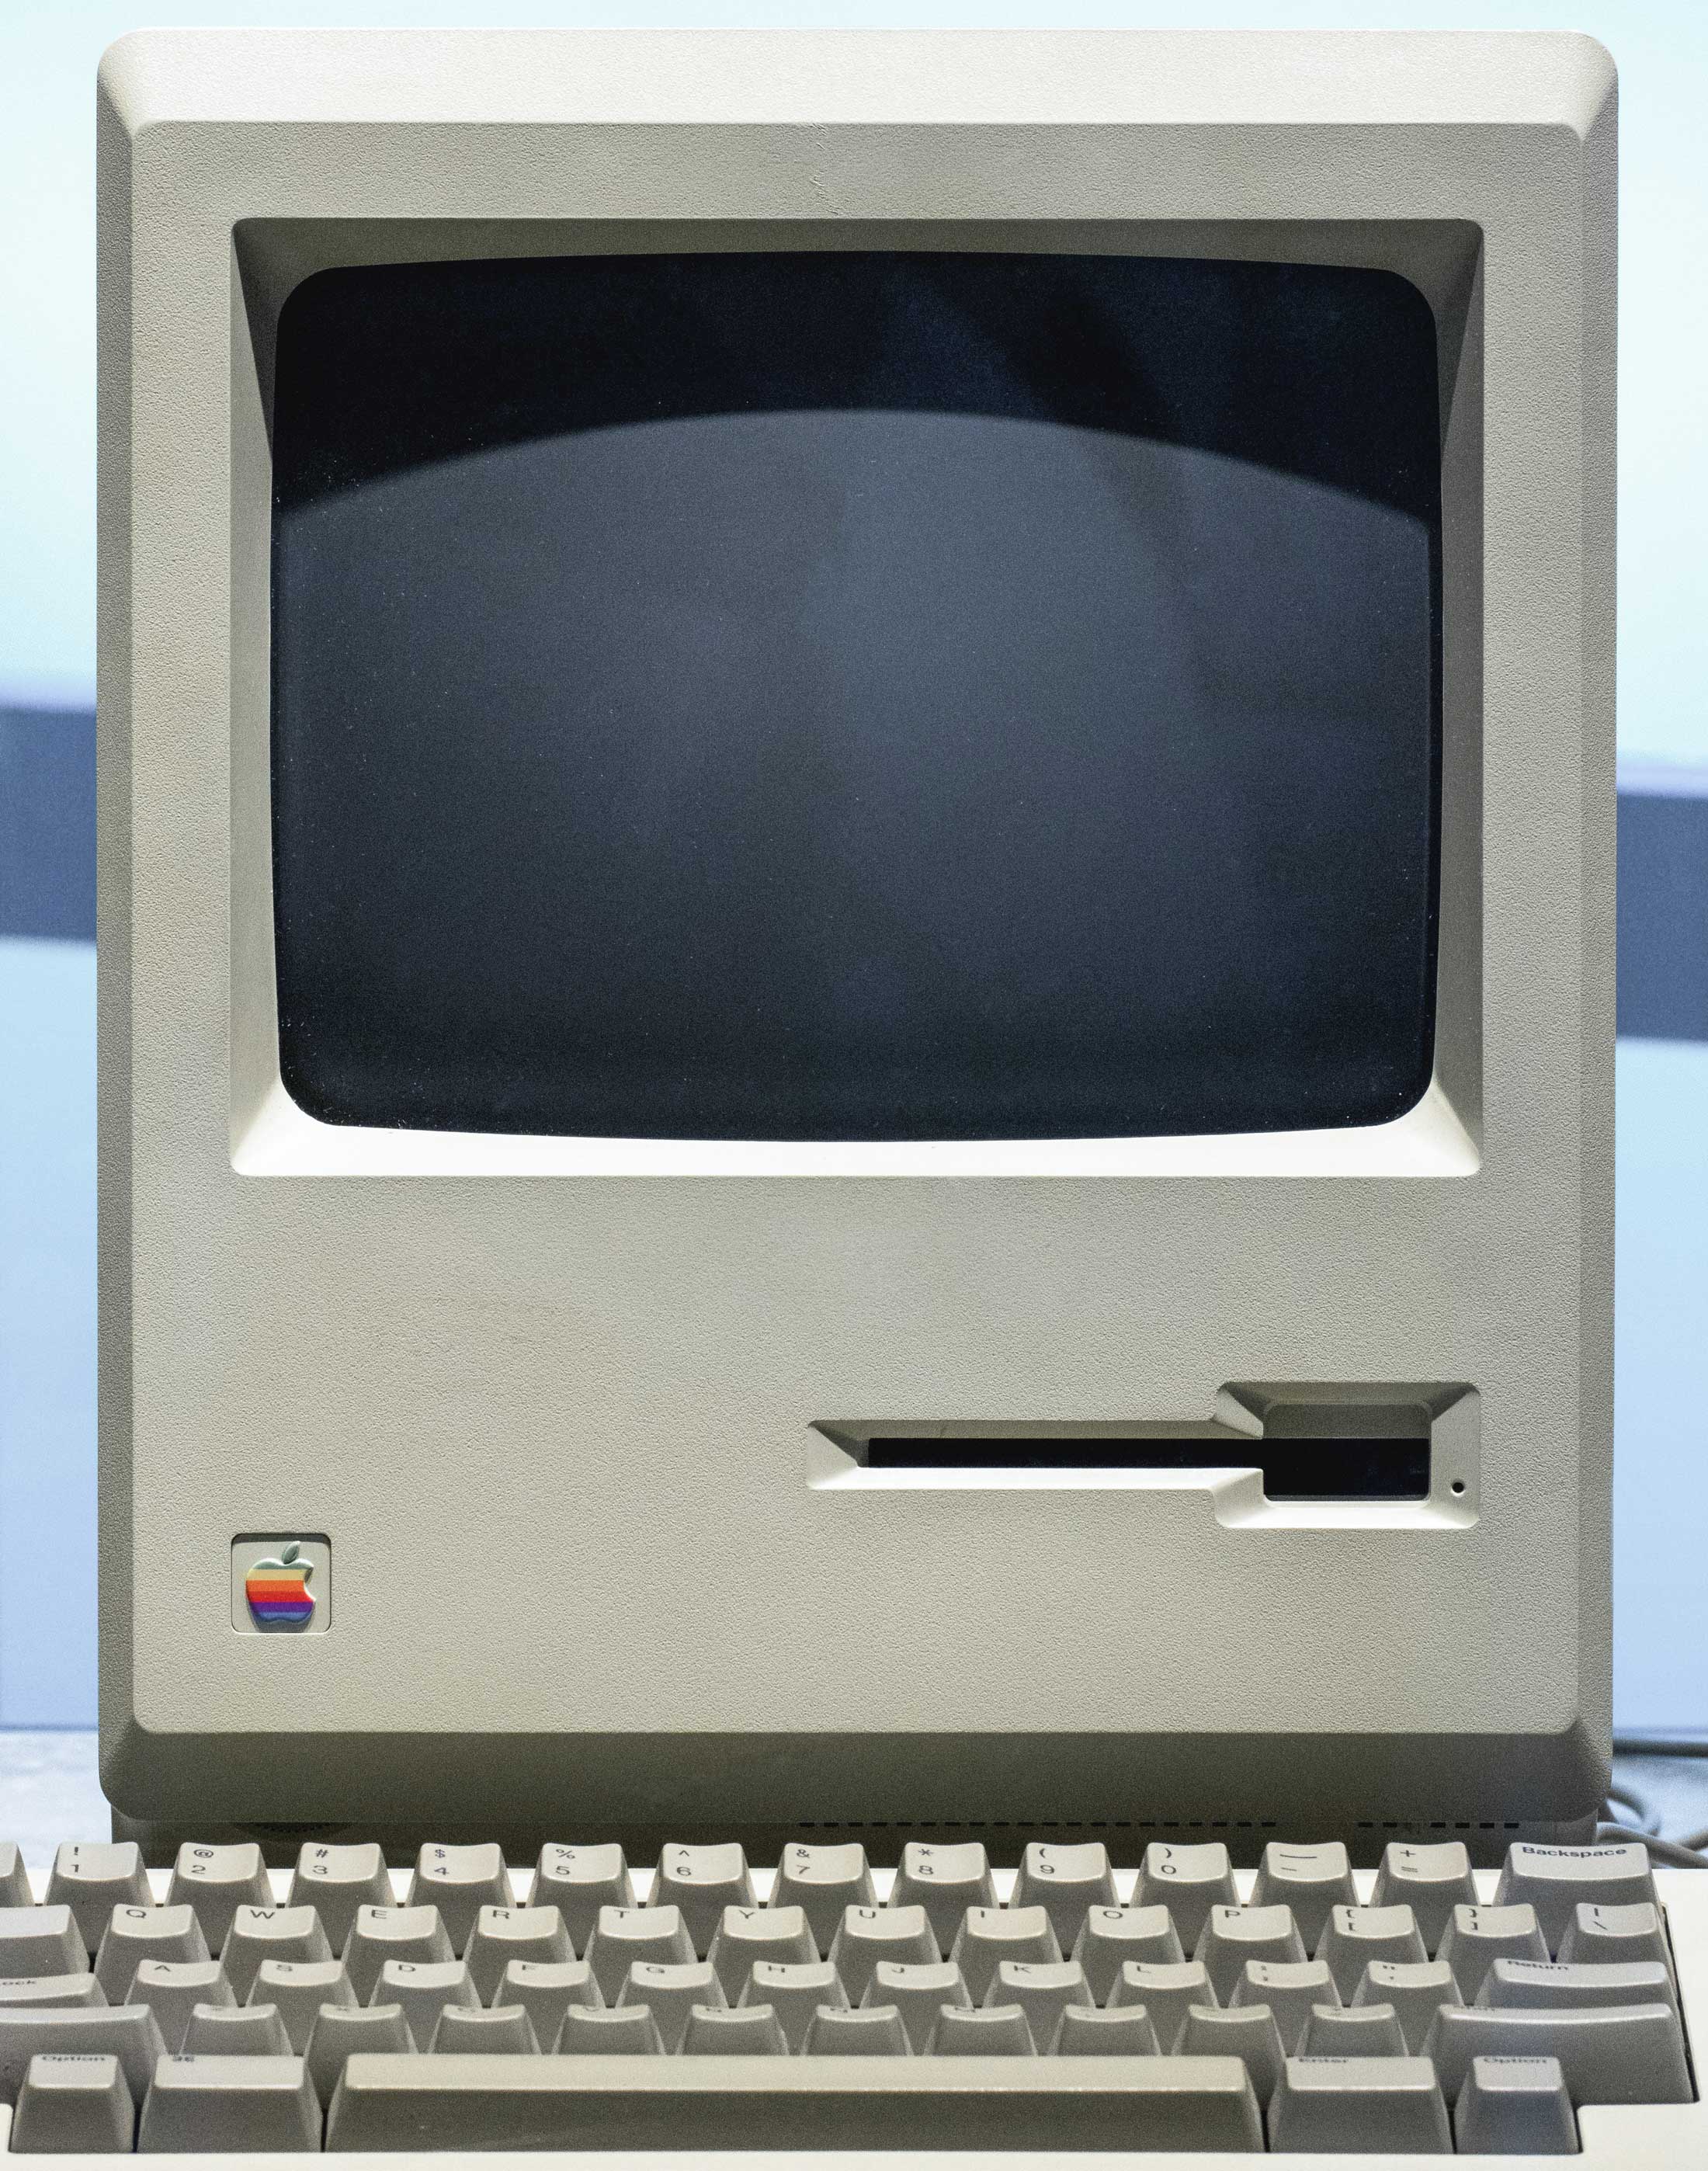 Front on photograph of the Macintosh 128K released in 1984, shows the small darkish yellow screen, then keyboard below.